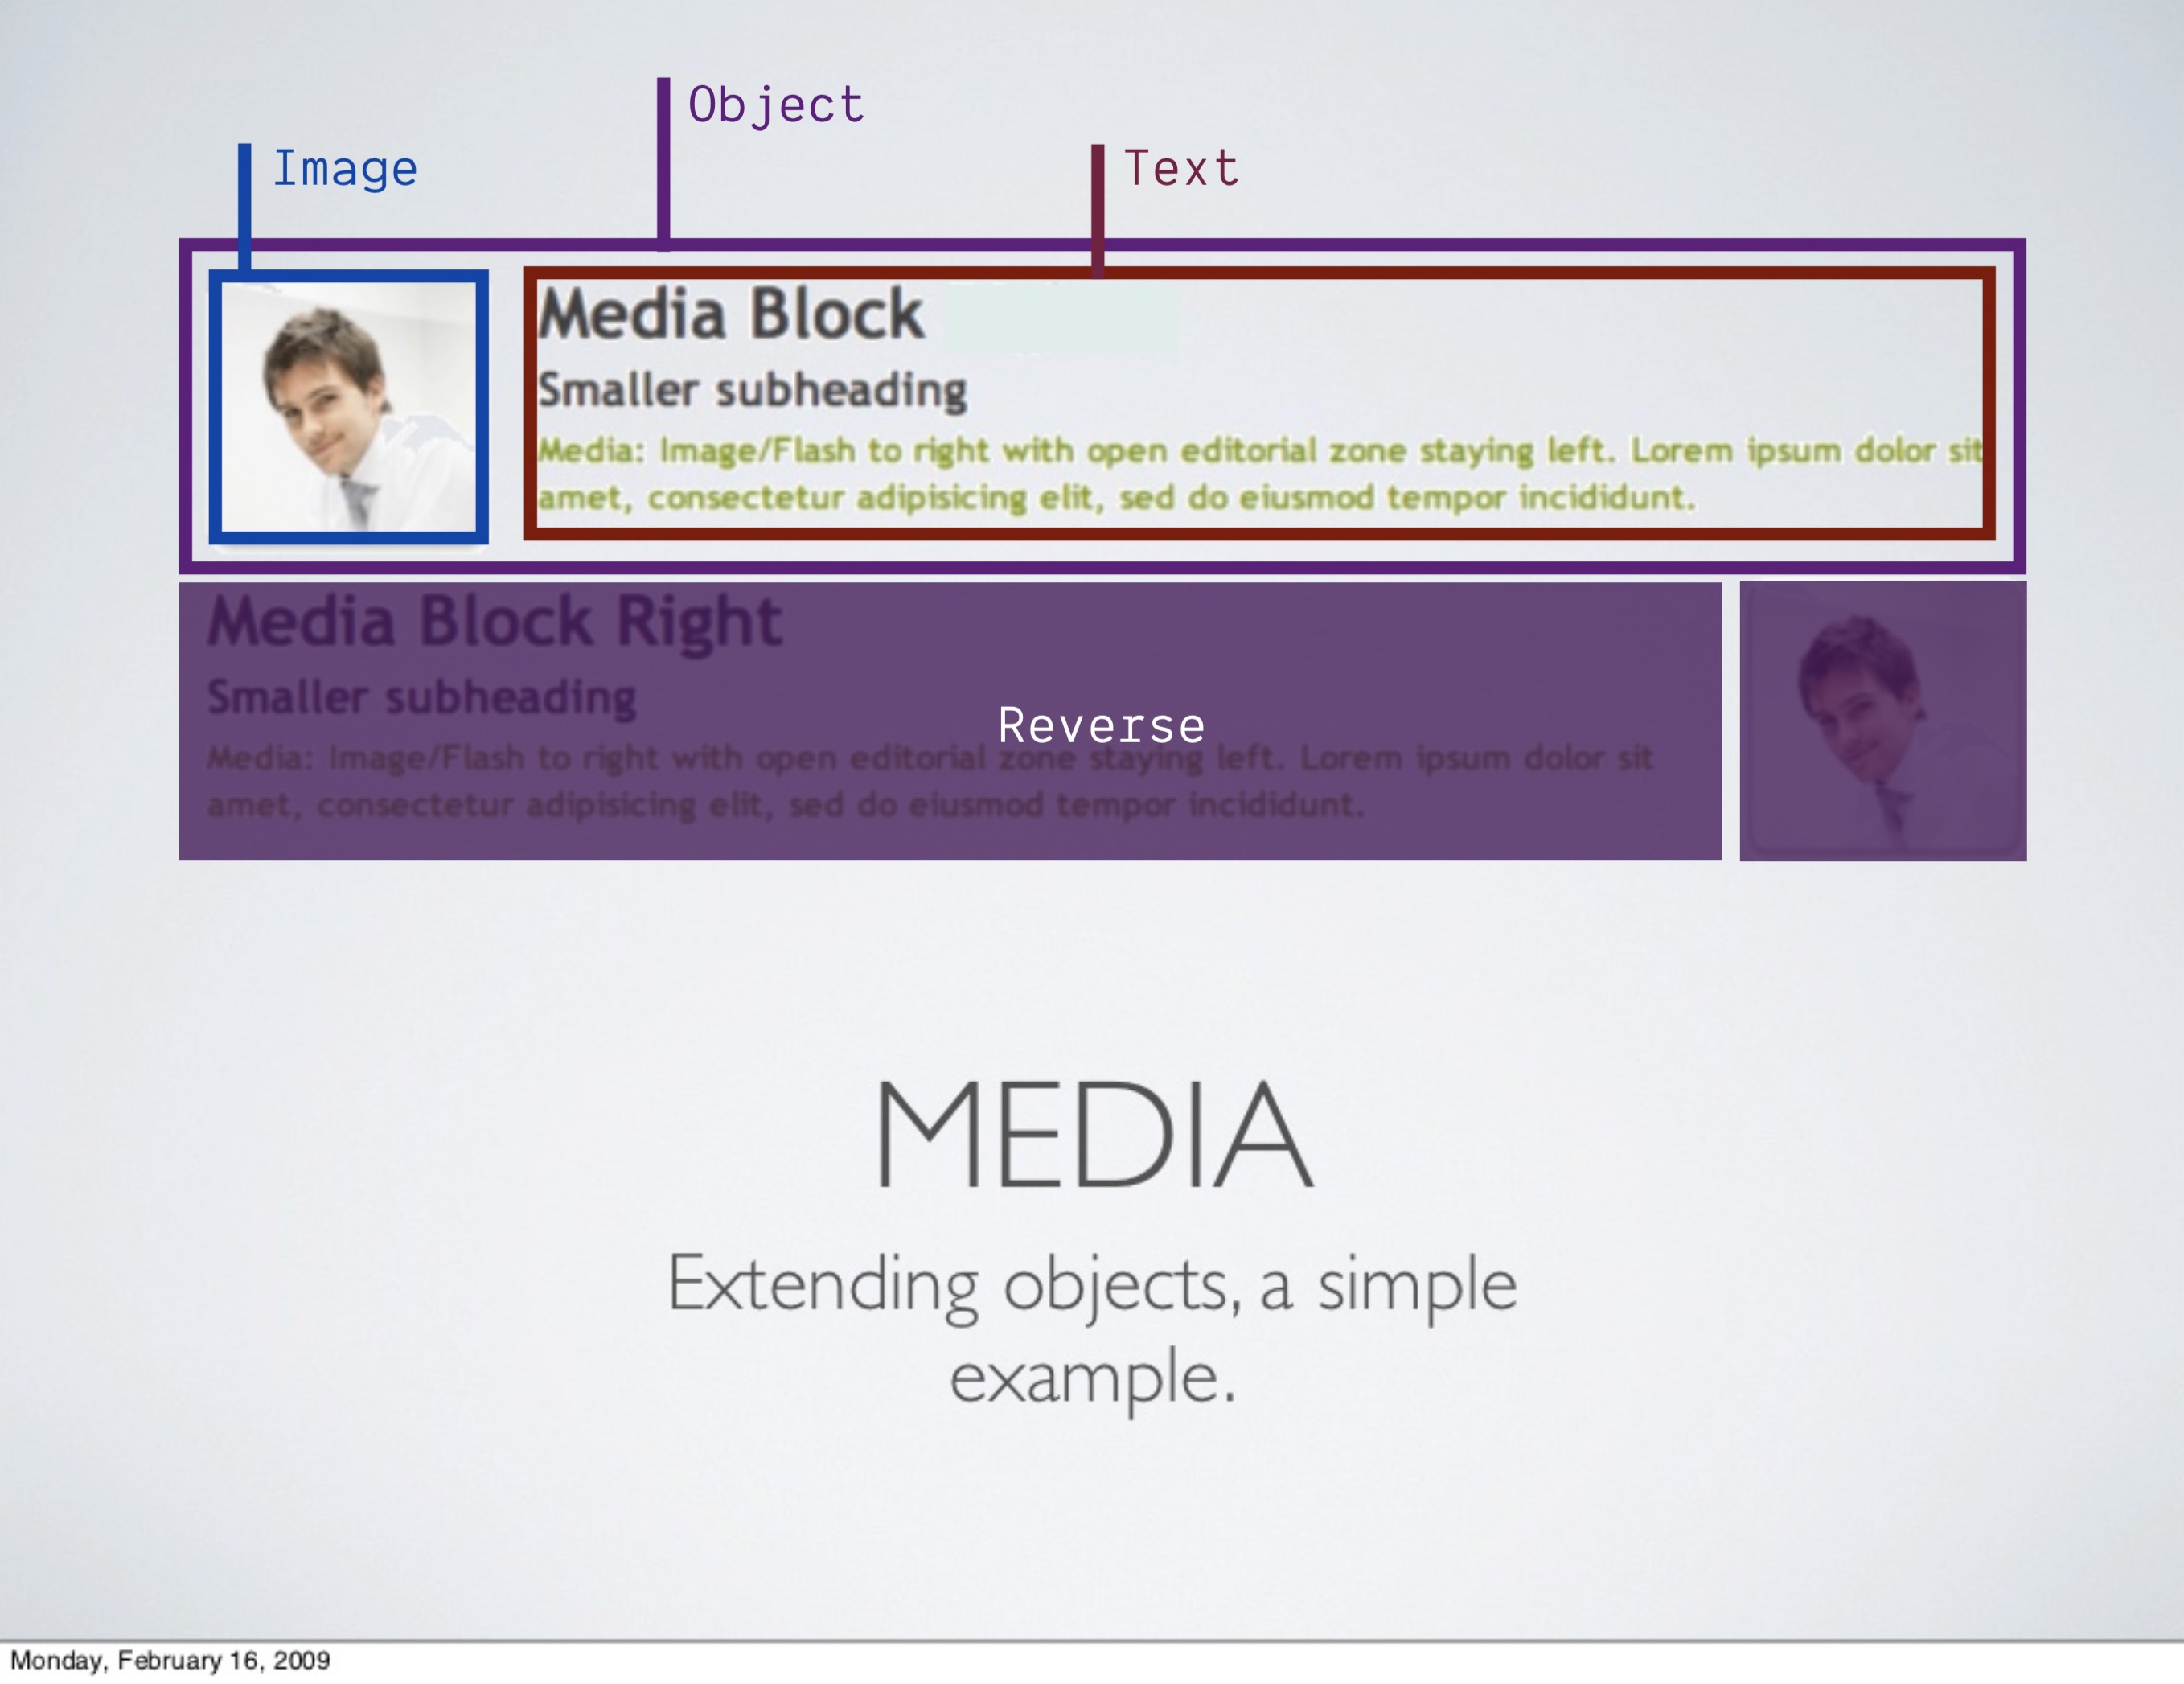 Same media blocks,
with overlayed boxes showing image and text elements
